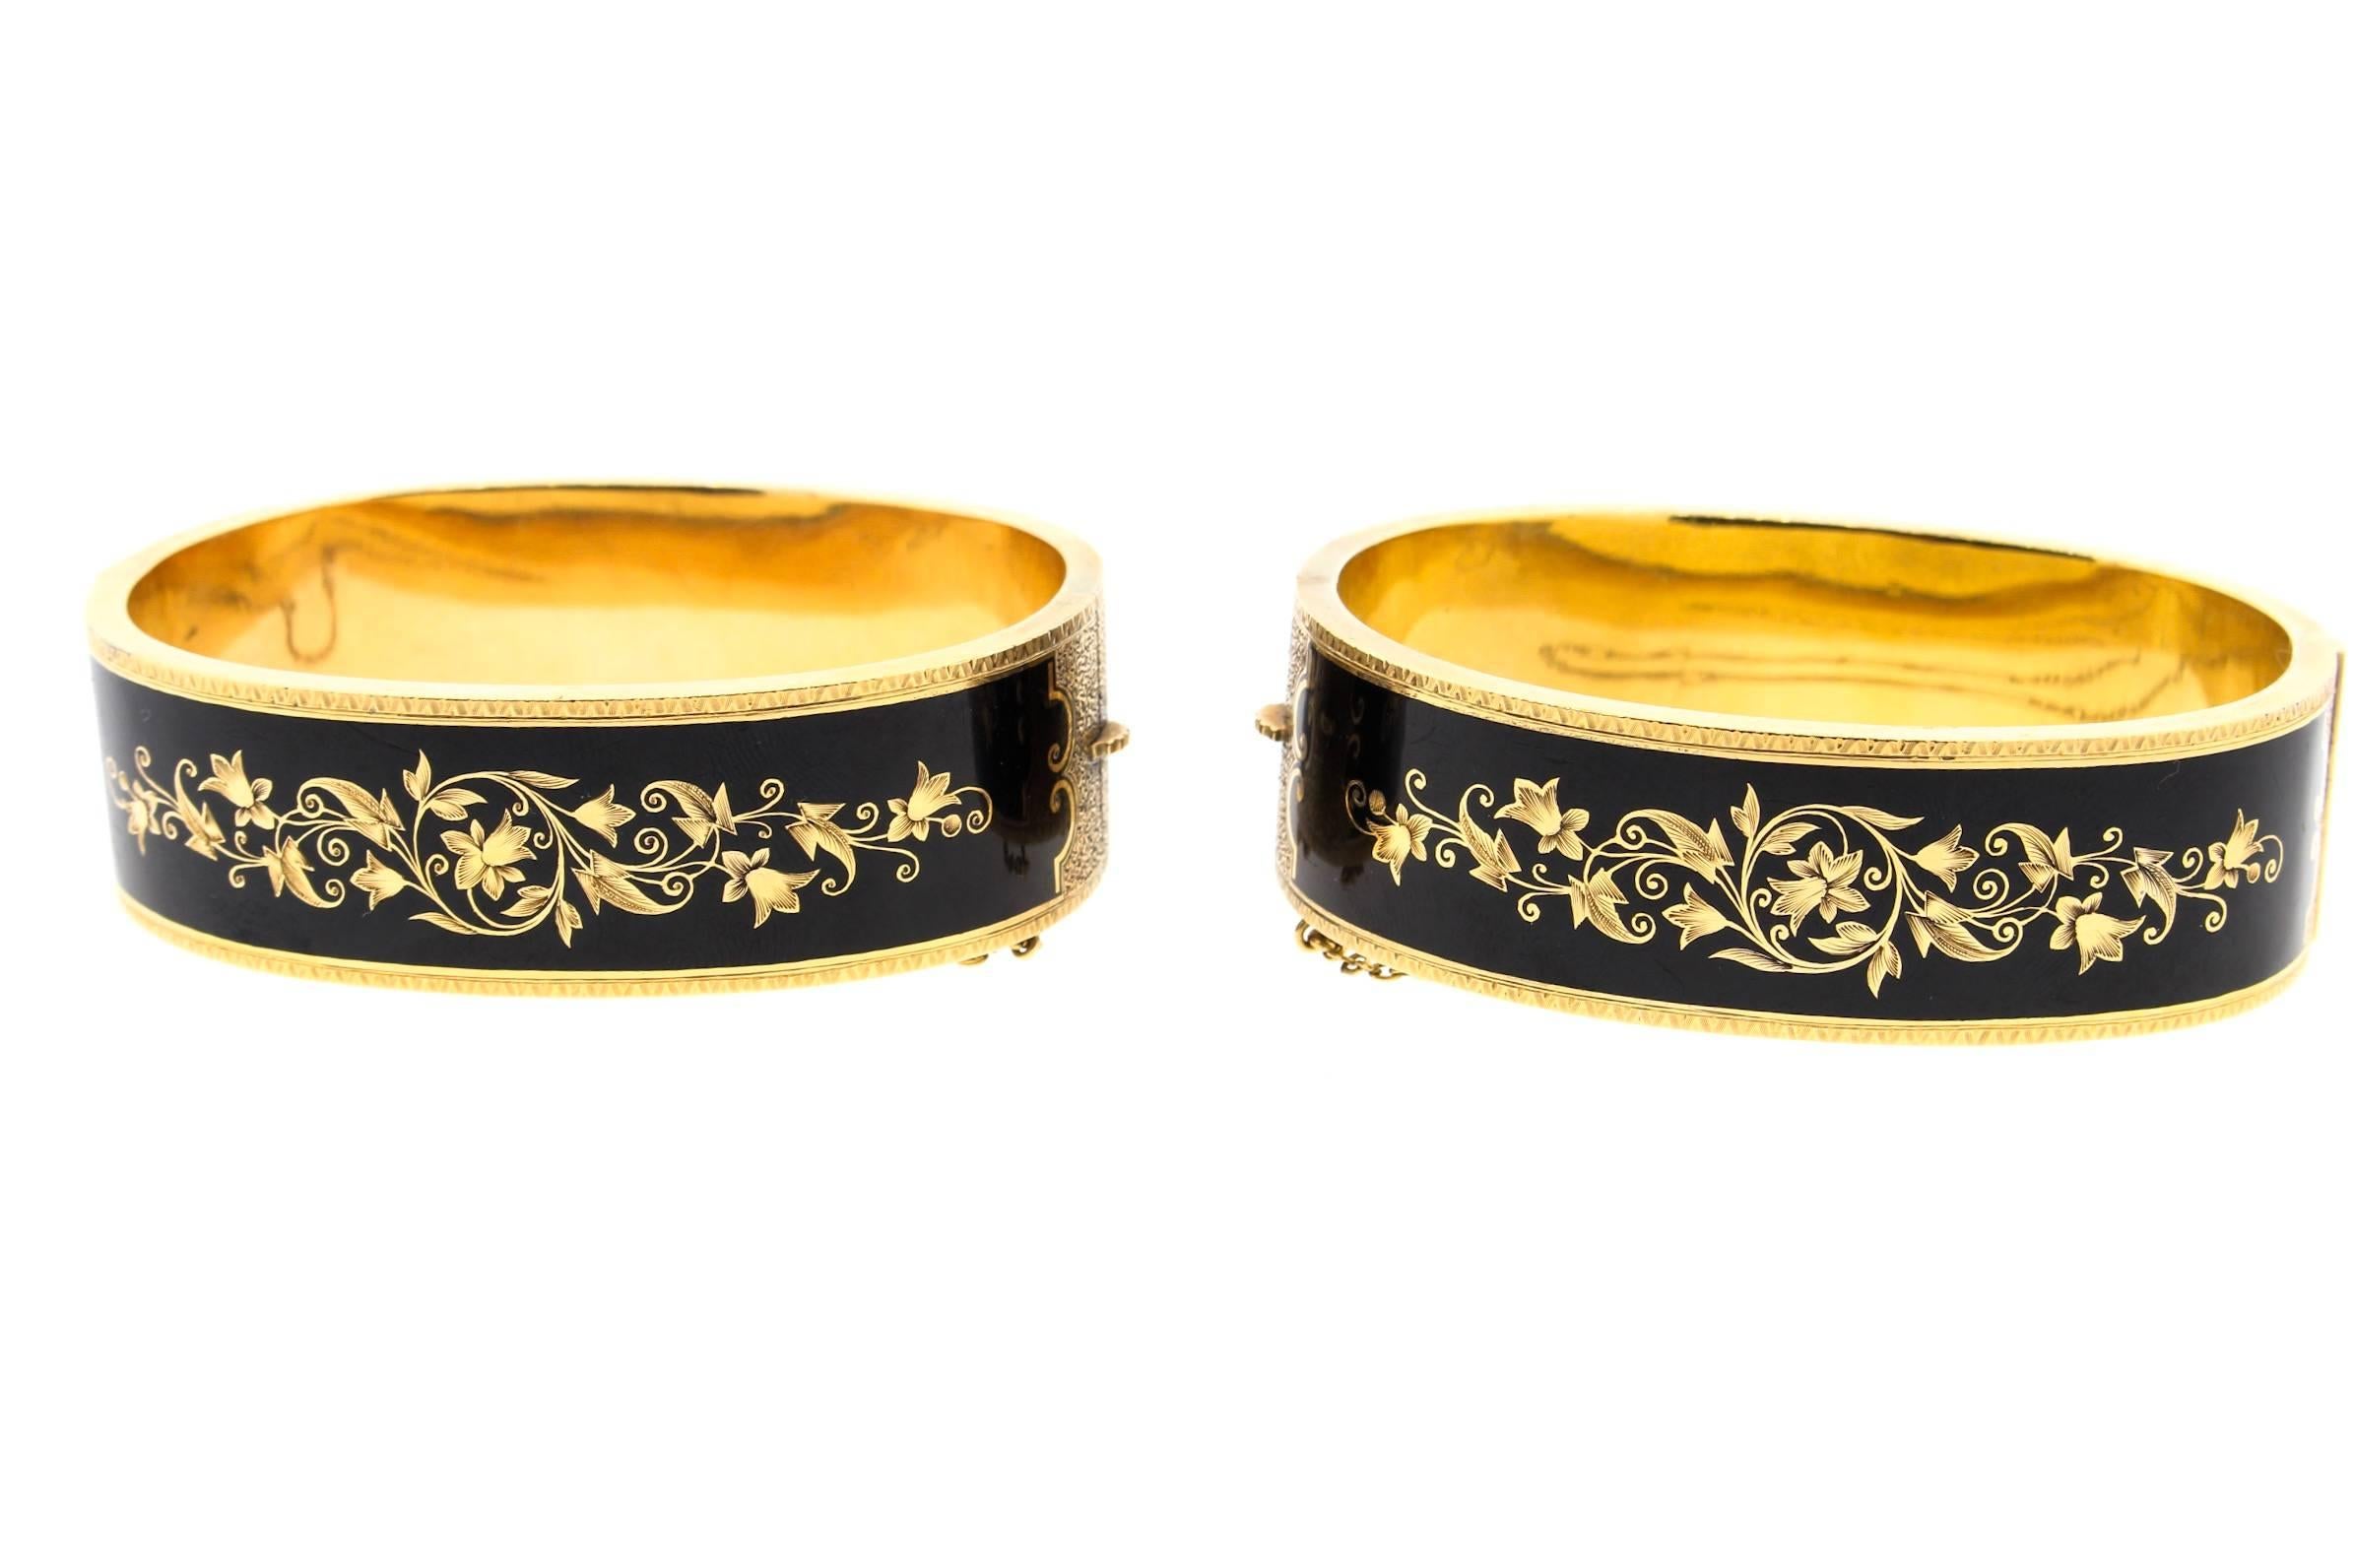 A fine pair of American Victorian black enamel mourning bangles circa 1890.  This 14k gold pair is oval and hinged, with a chain safety.  One side of the bangle has gold tracery scroll work, and the other side has gold tracery floral and leaf